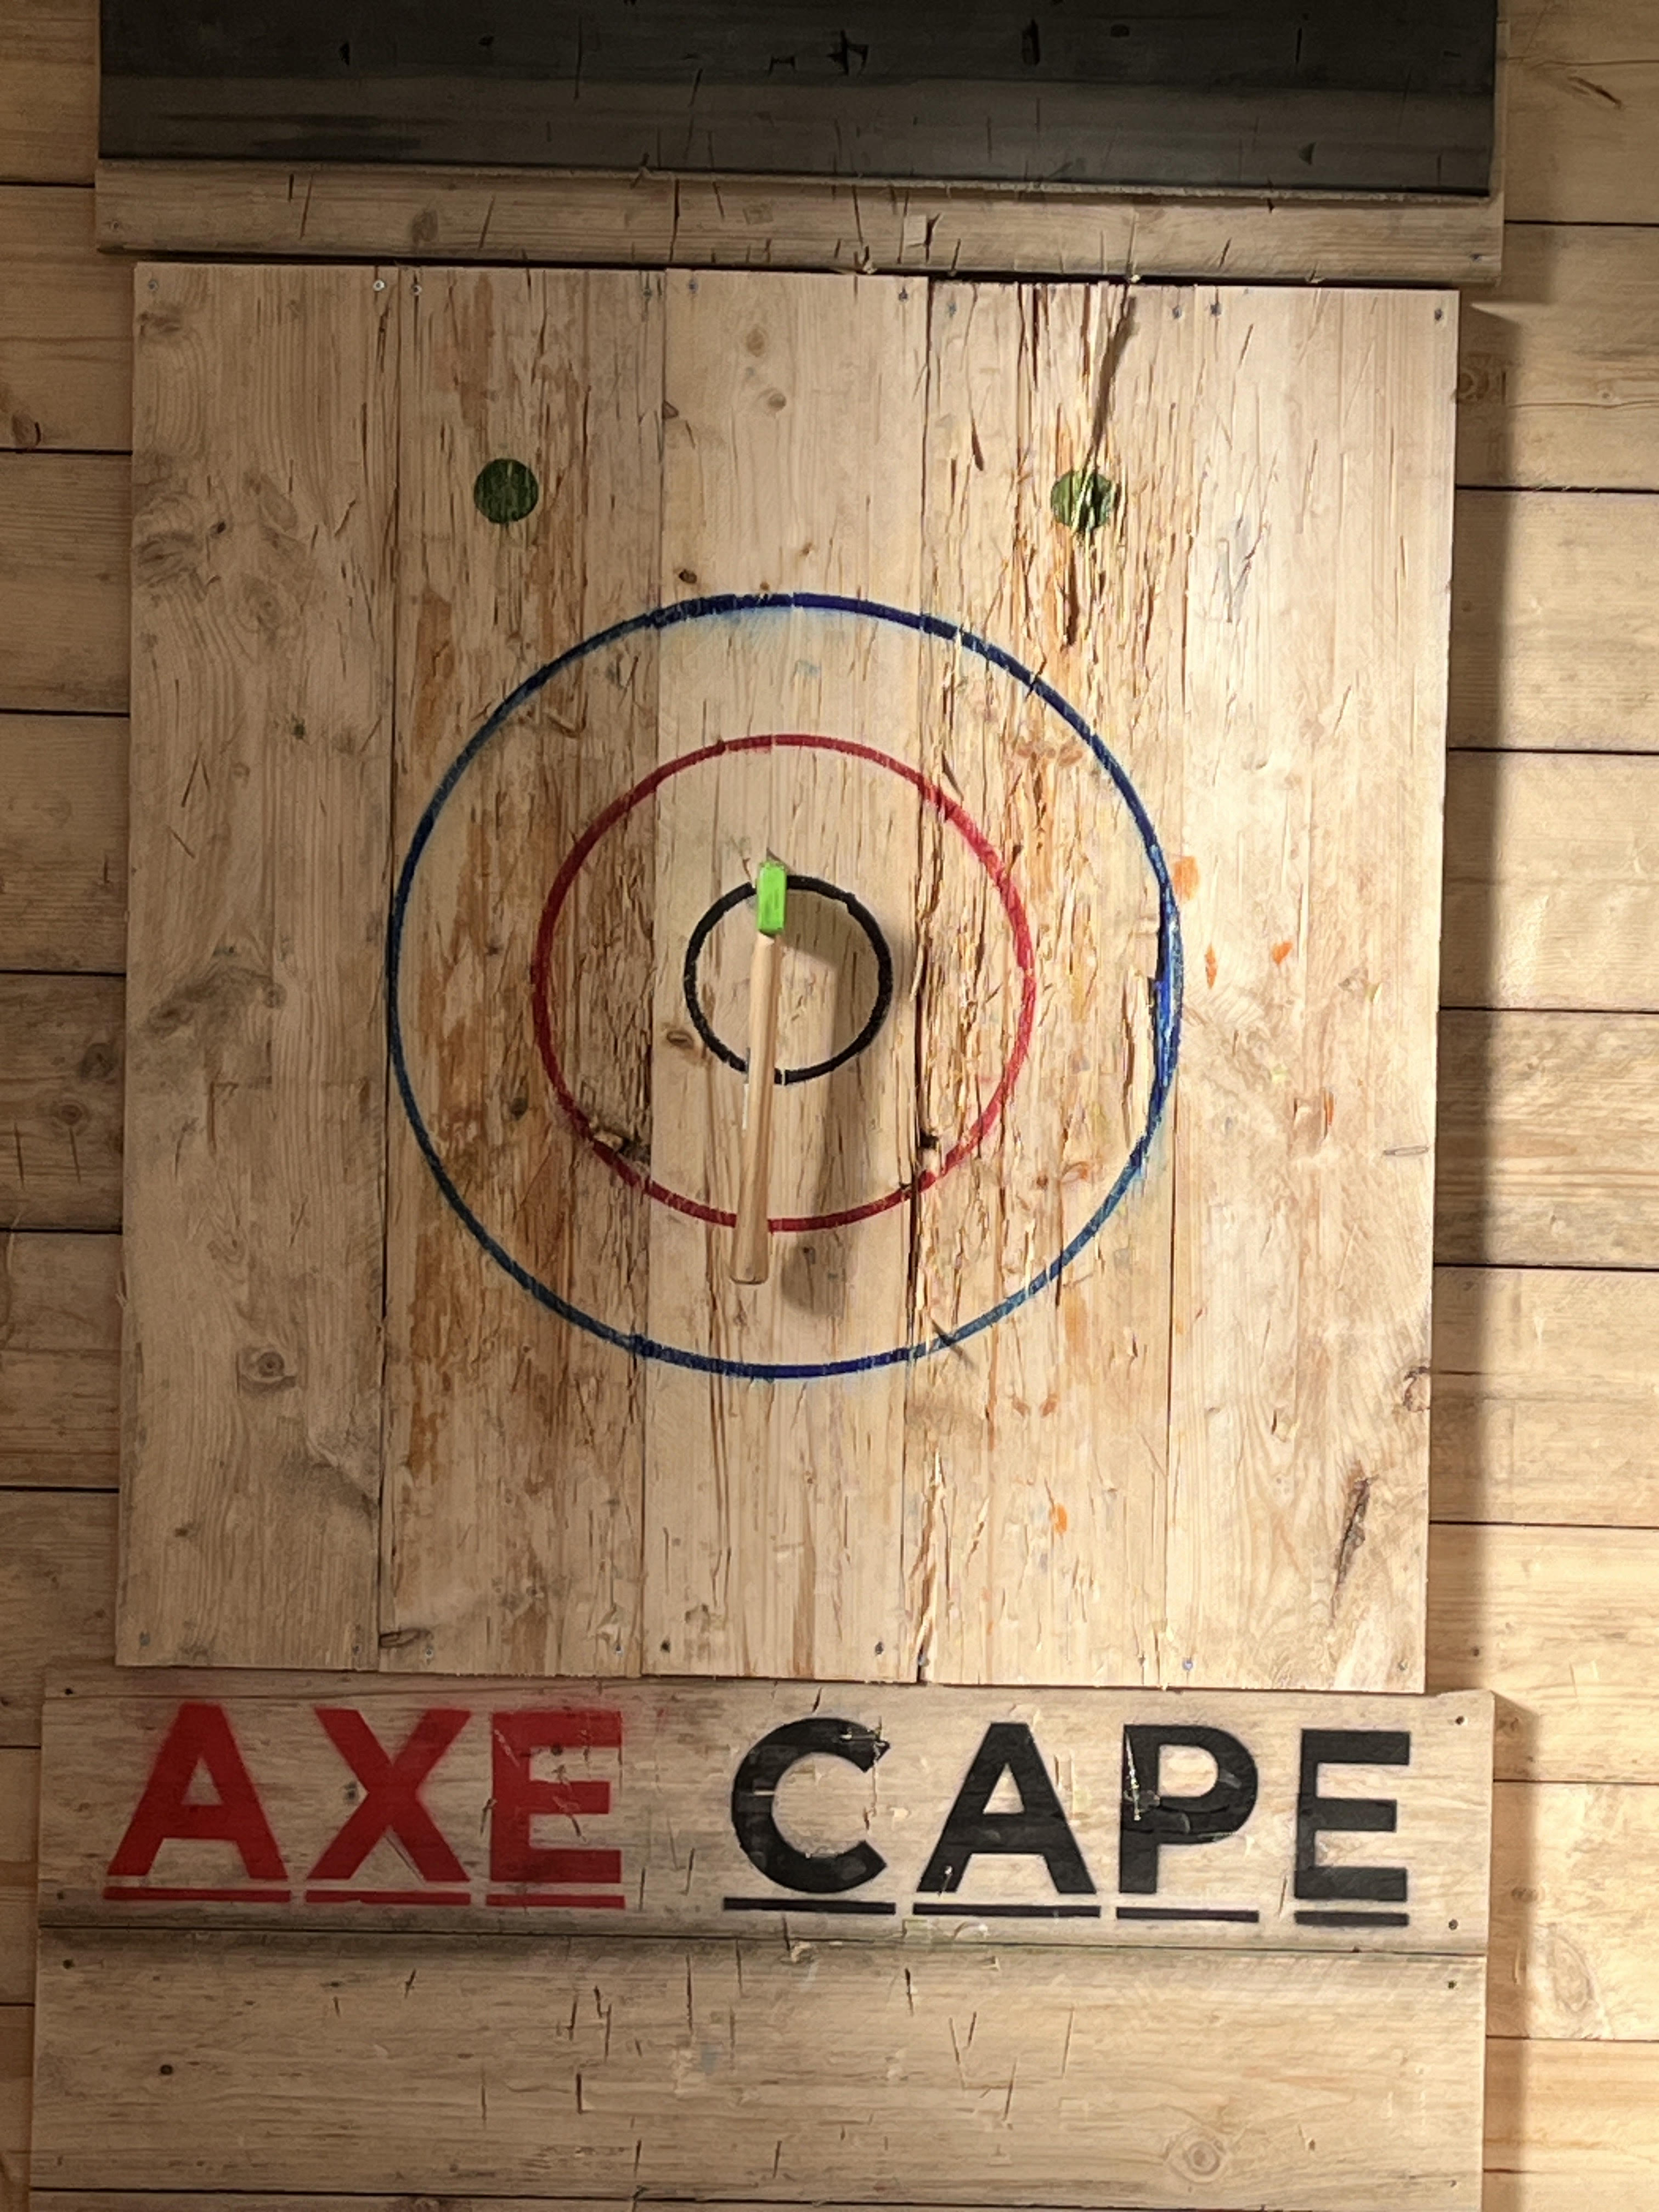 Throw axes, with options for the whole family